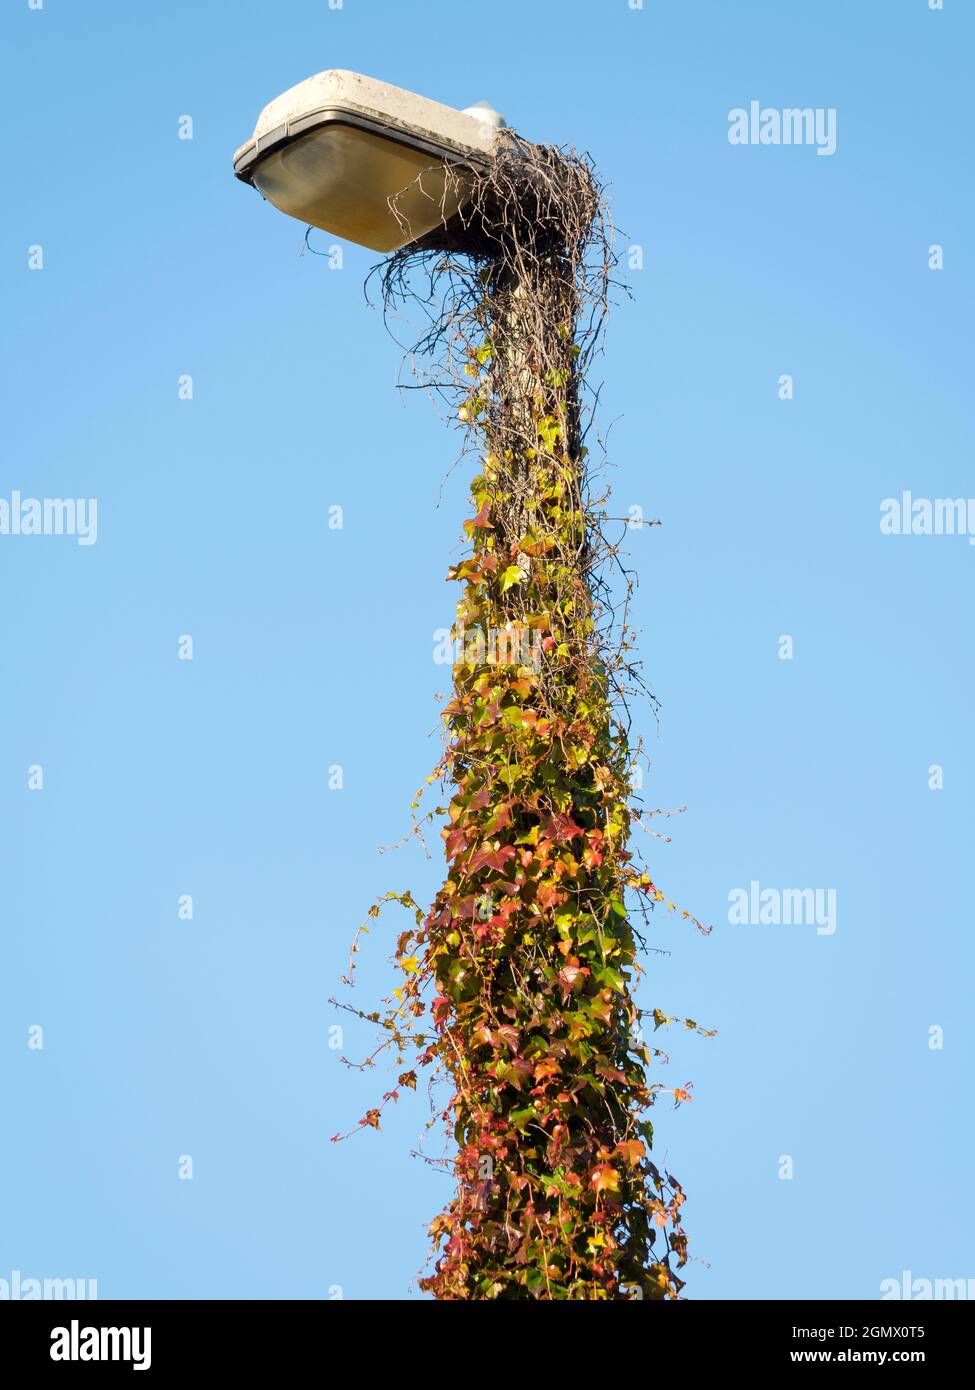 Oxford, England - 2015; No, not some art installation. This is a street lamp in central Oxford that has overgrown with creeping Ivy. Autumn transforms Stock Photo